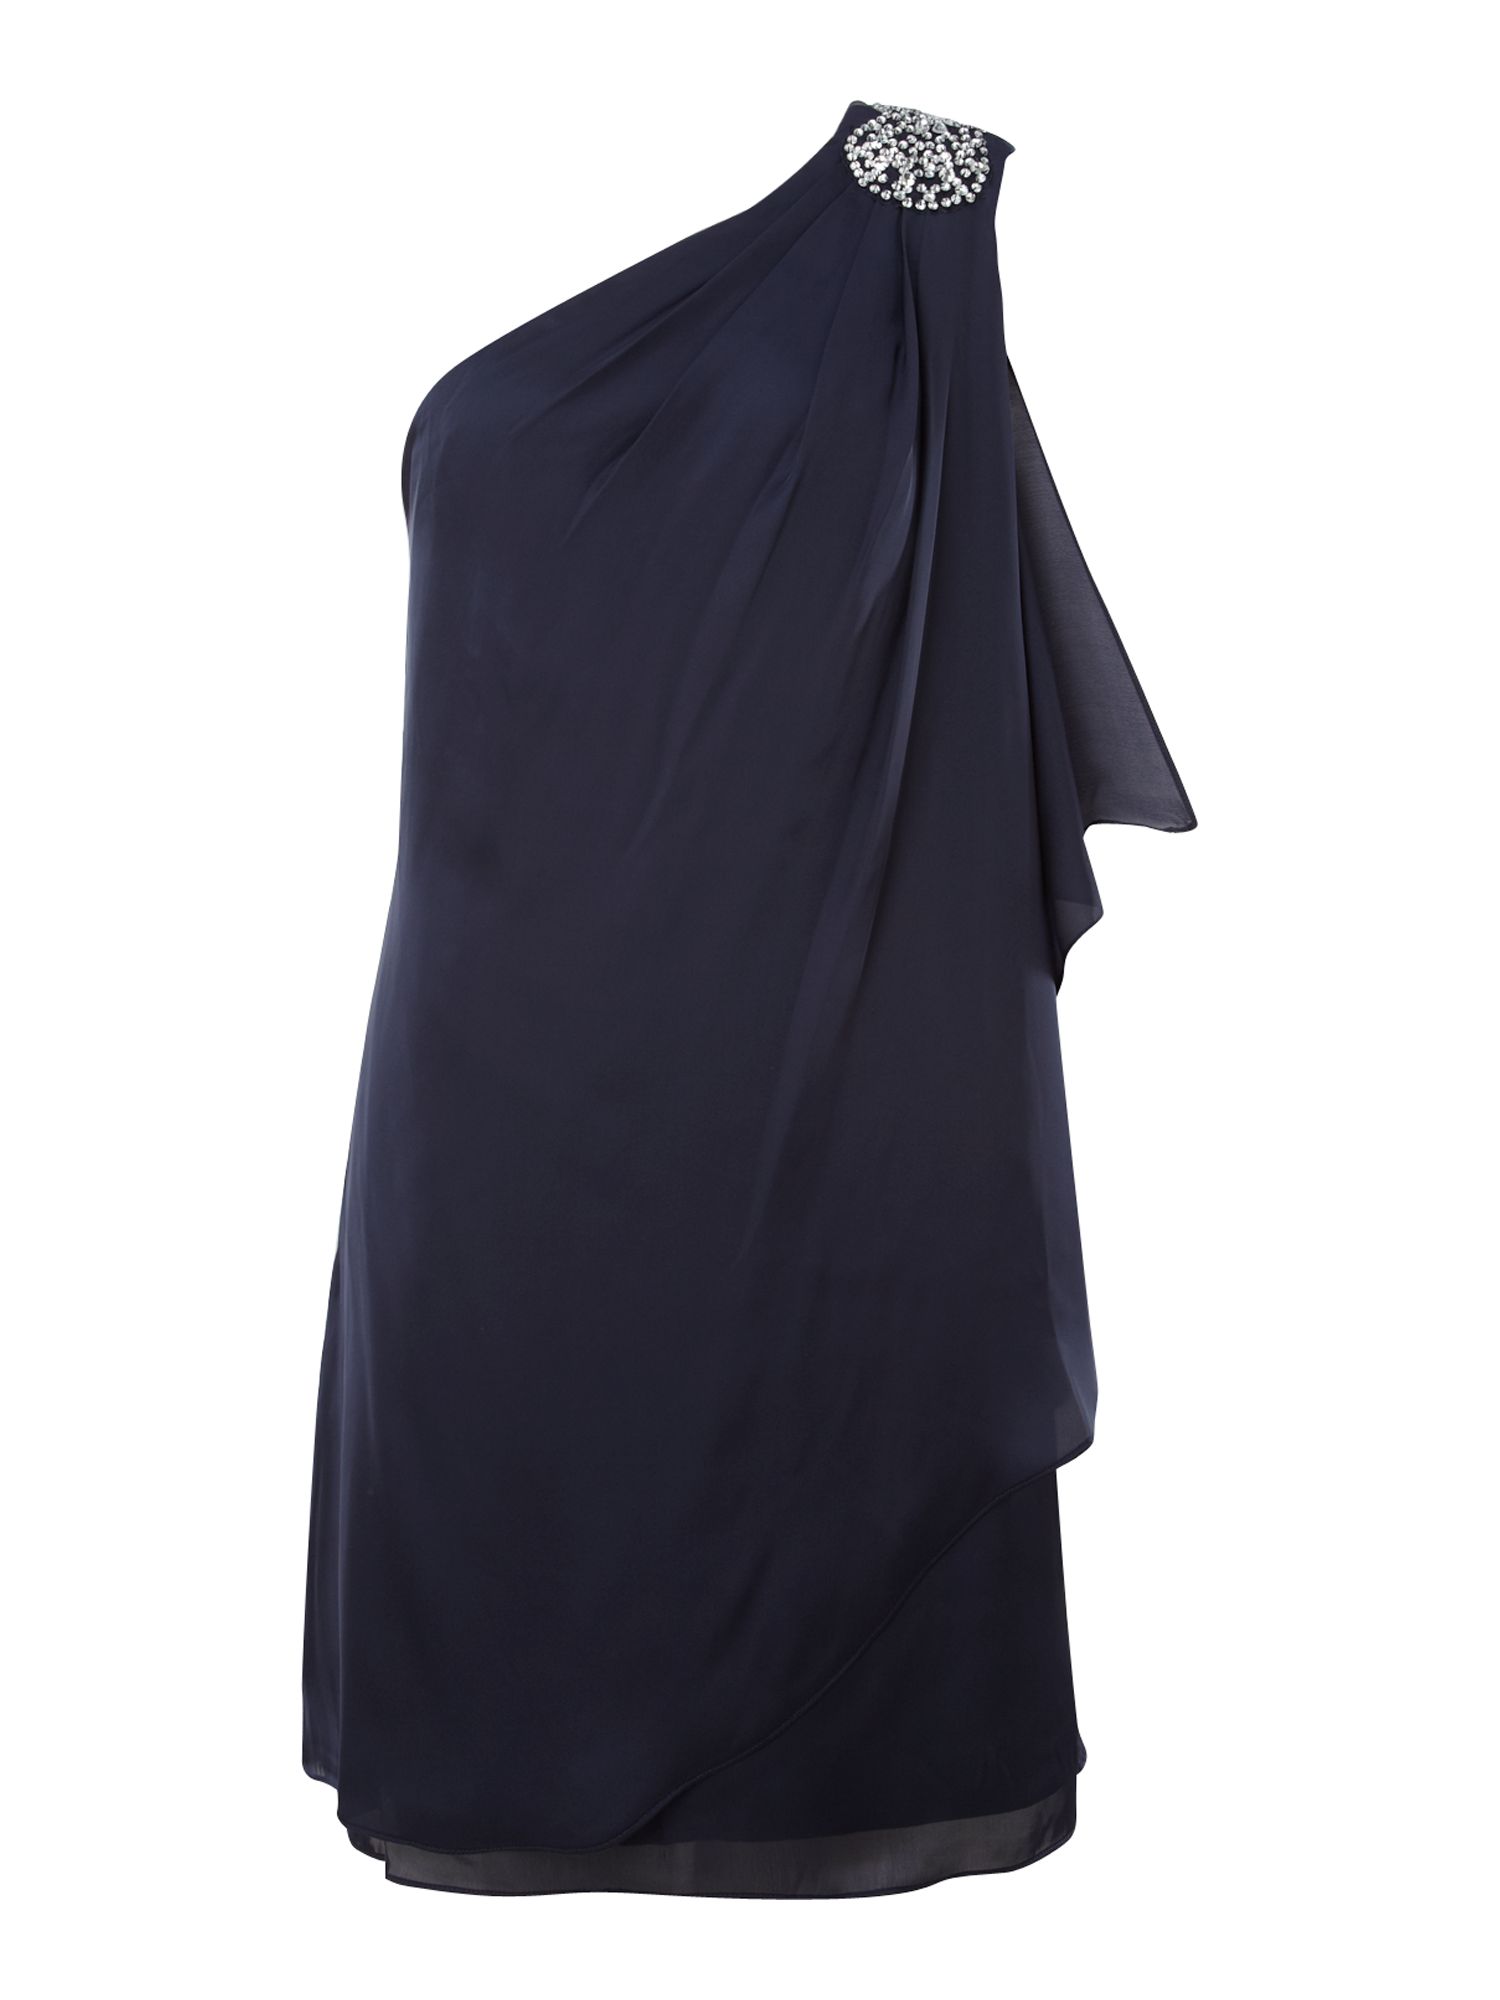 Js collections One Shoulder Draped Dress in Blue | Lyst